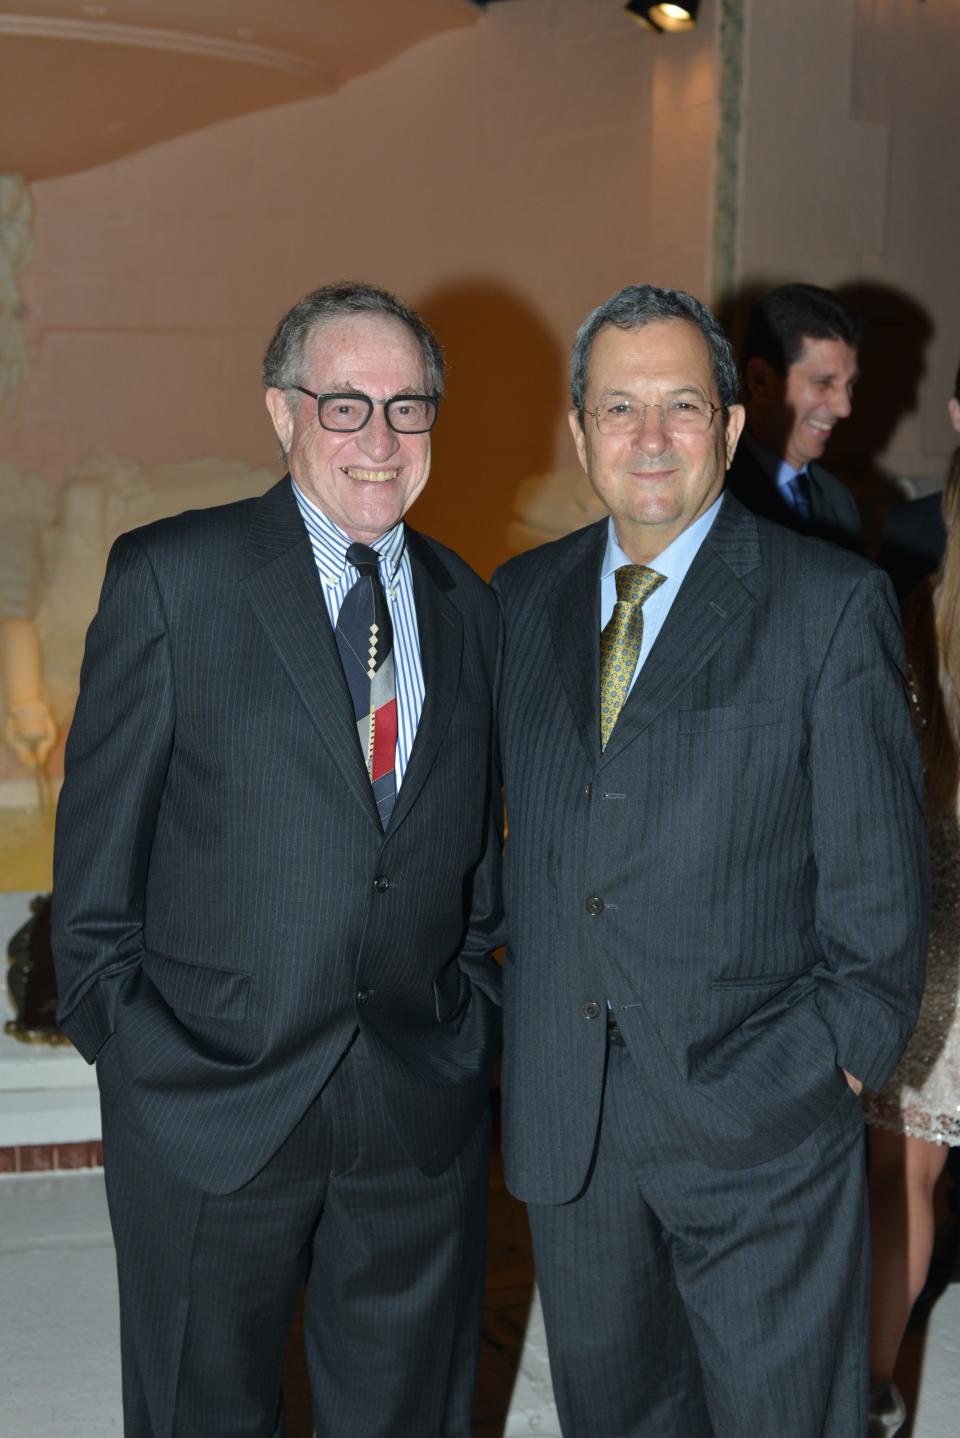 Then-Israeli Prime Minister Ehud Barak, at right, and Alan Dershowitz at the 2014 Magen David Adom event at the Mar-a-Lago club, where Barak described the organization as "one of the most important institutions in Israel."